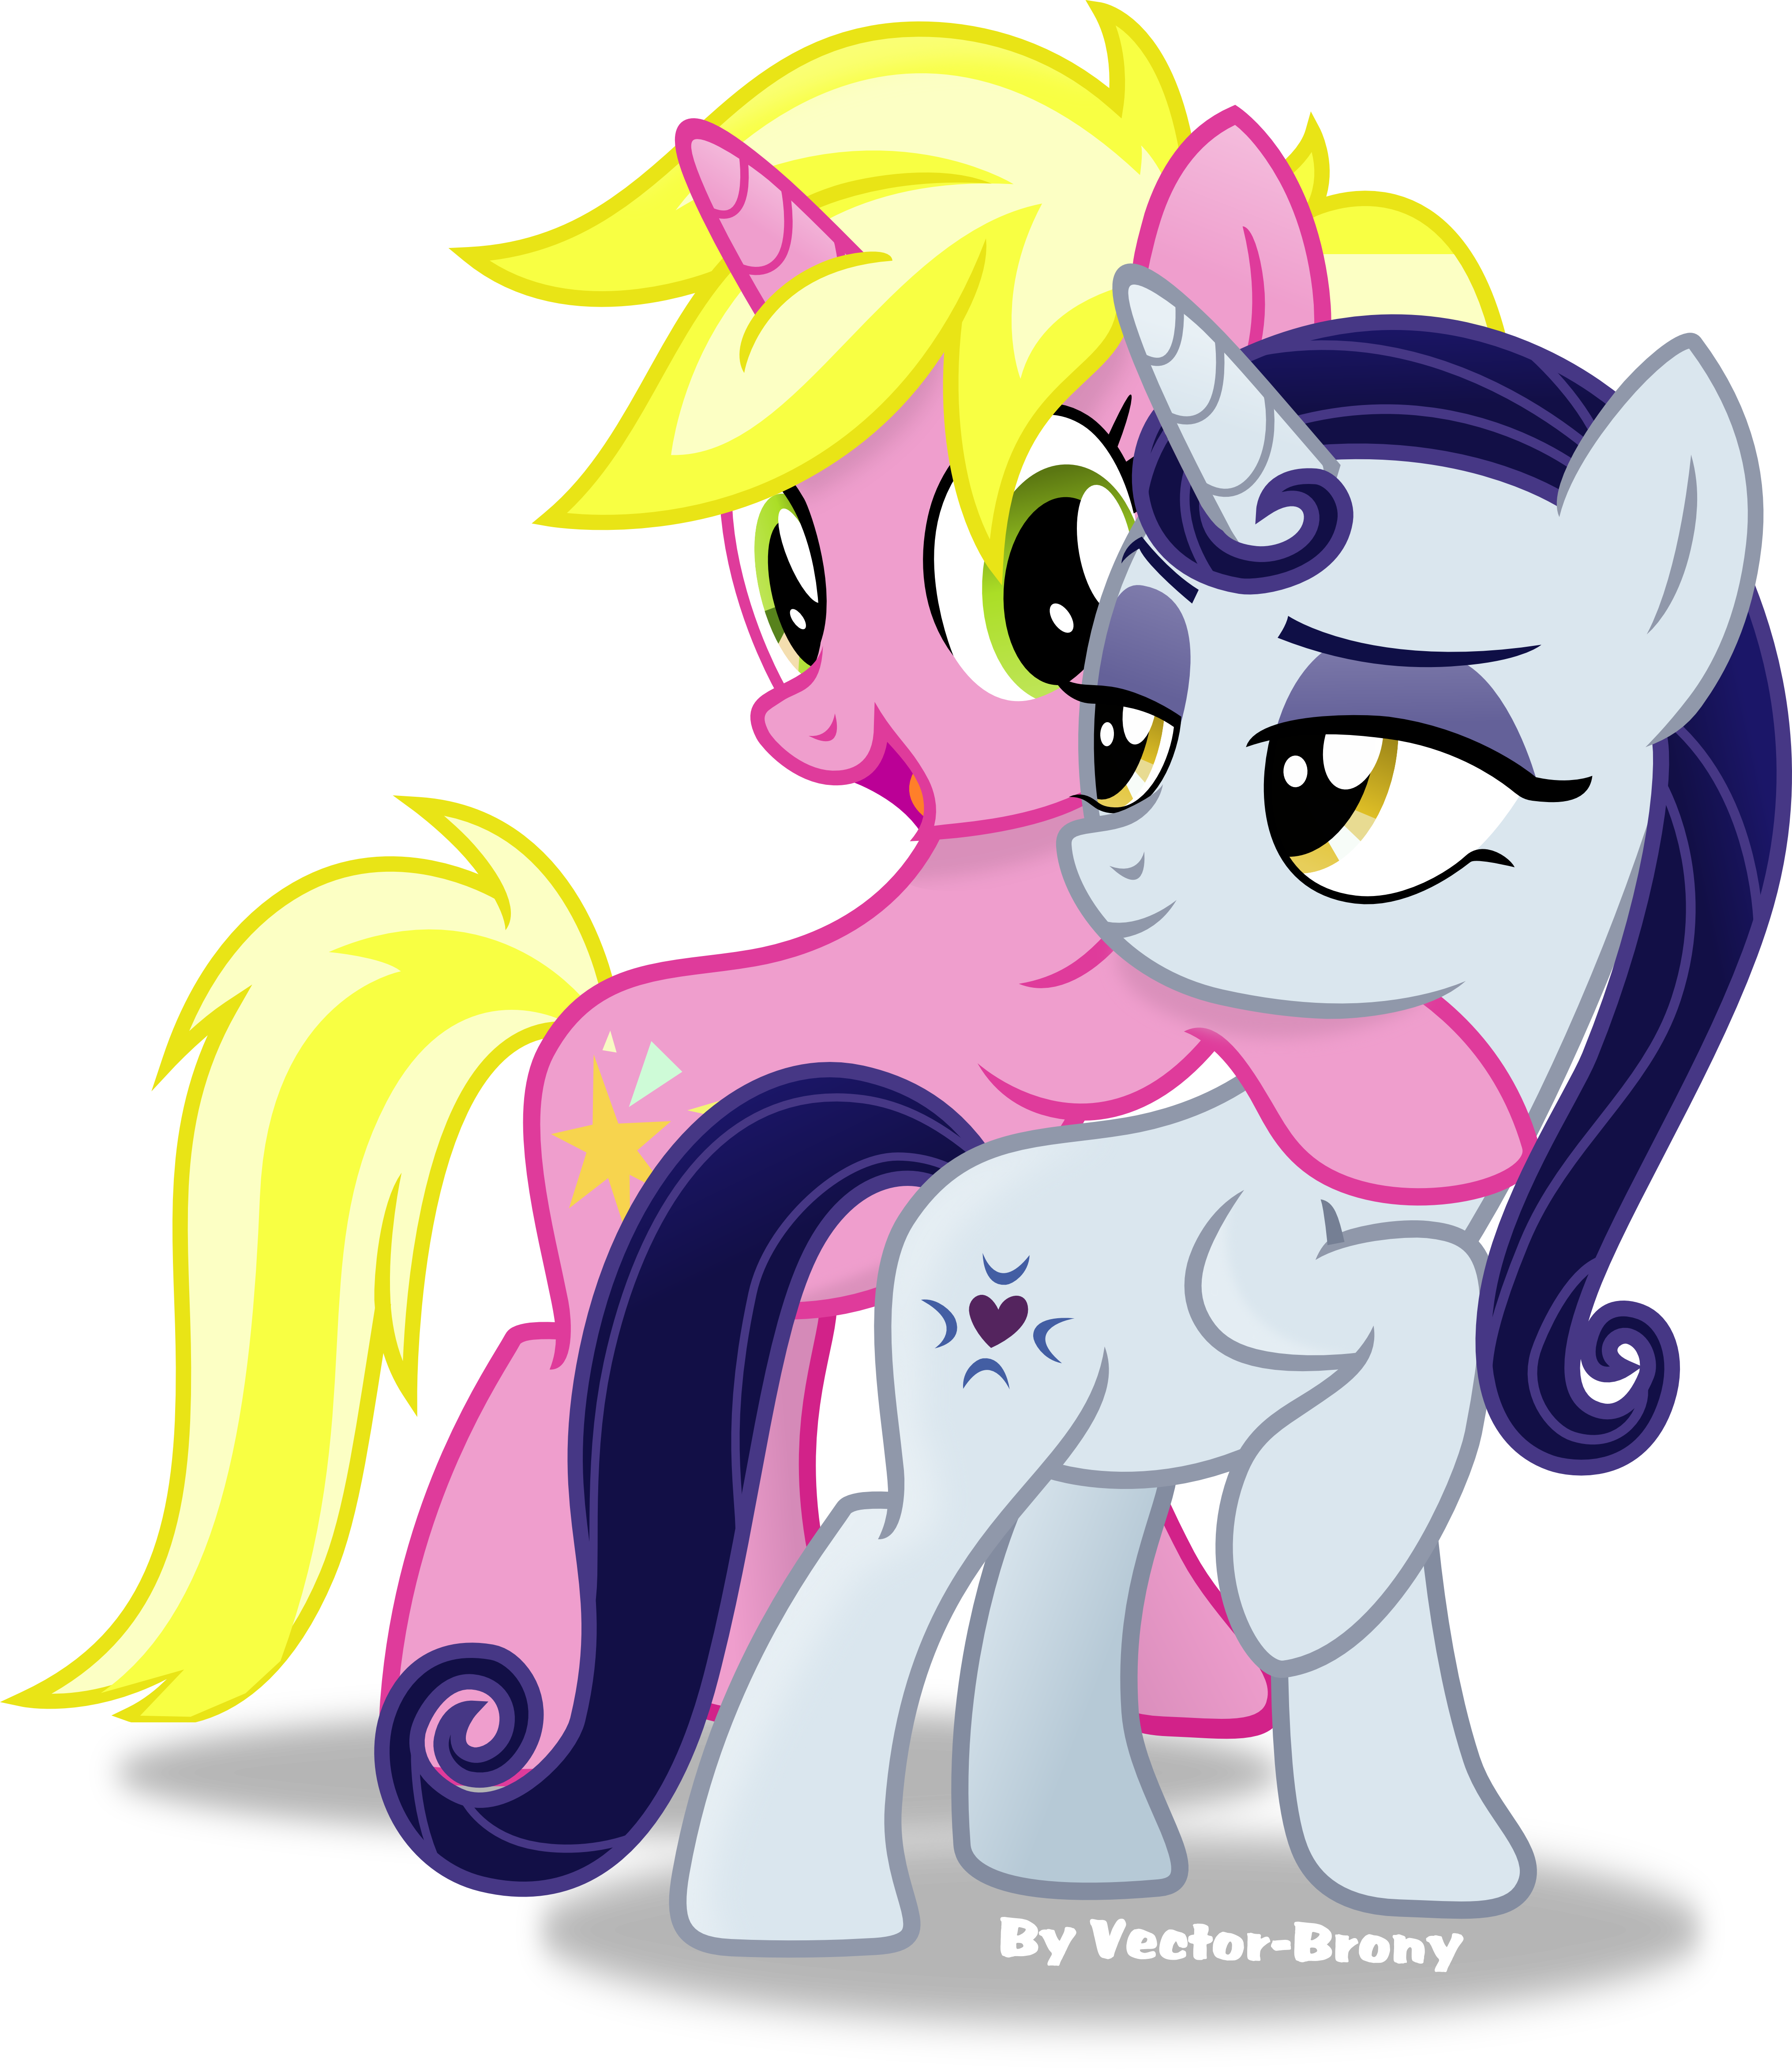 Moonlight Raven And Sunshine Smiles By Vector-brony - My Little Pony Moonlight Raven (4062x4692)